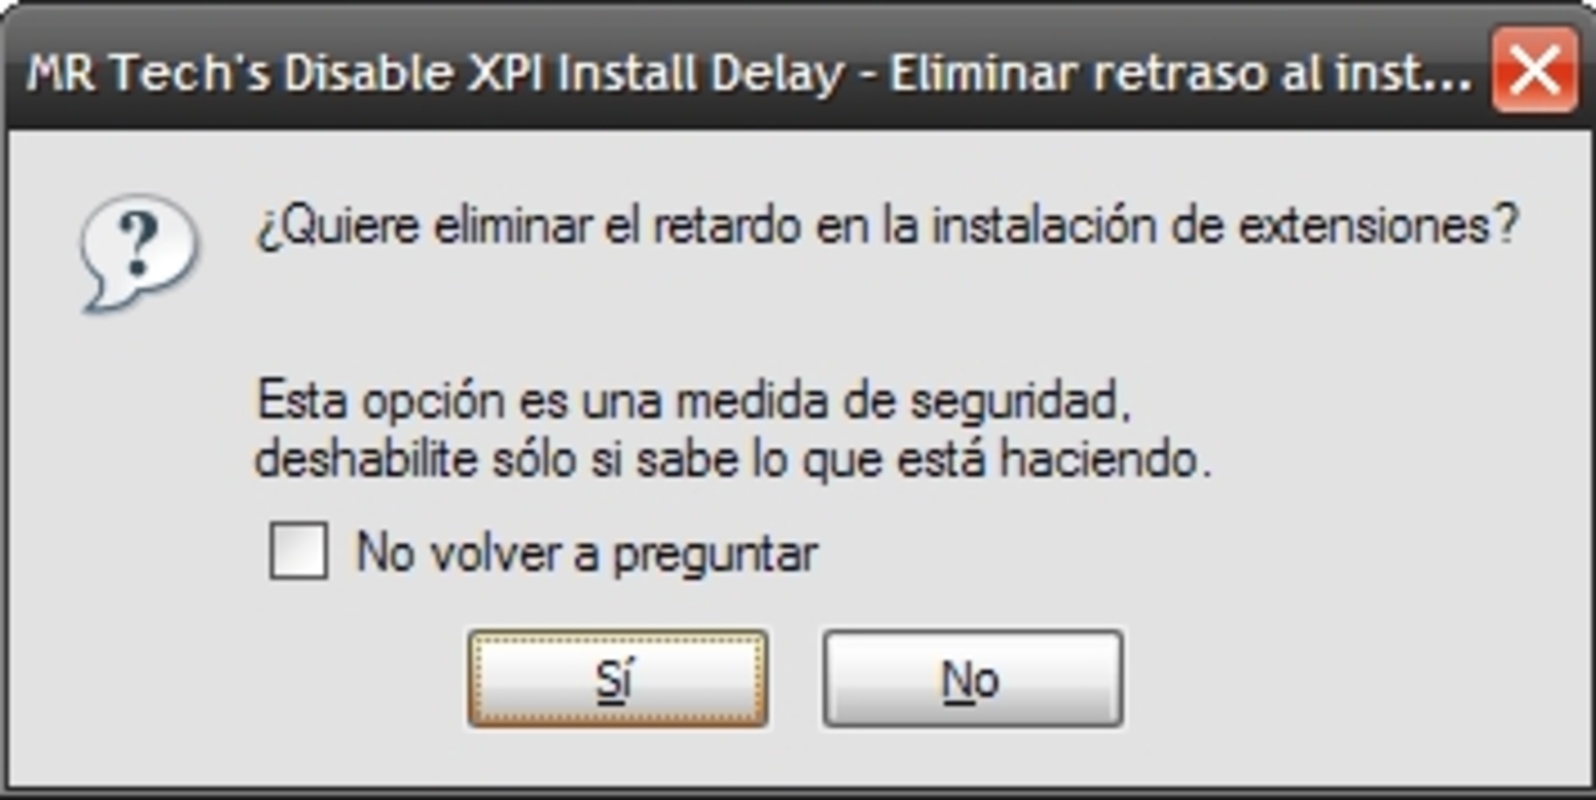 Disable XPI Install Delay 2.4.1 feature